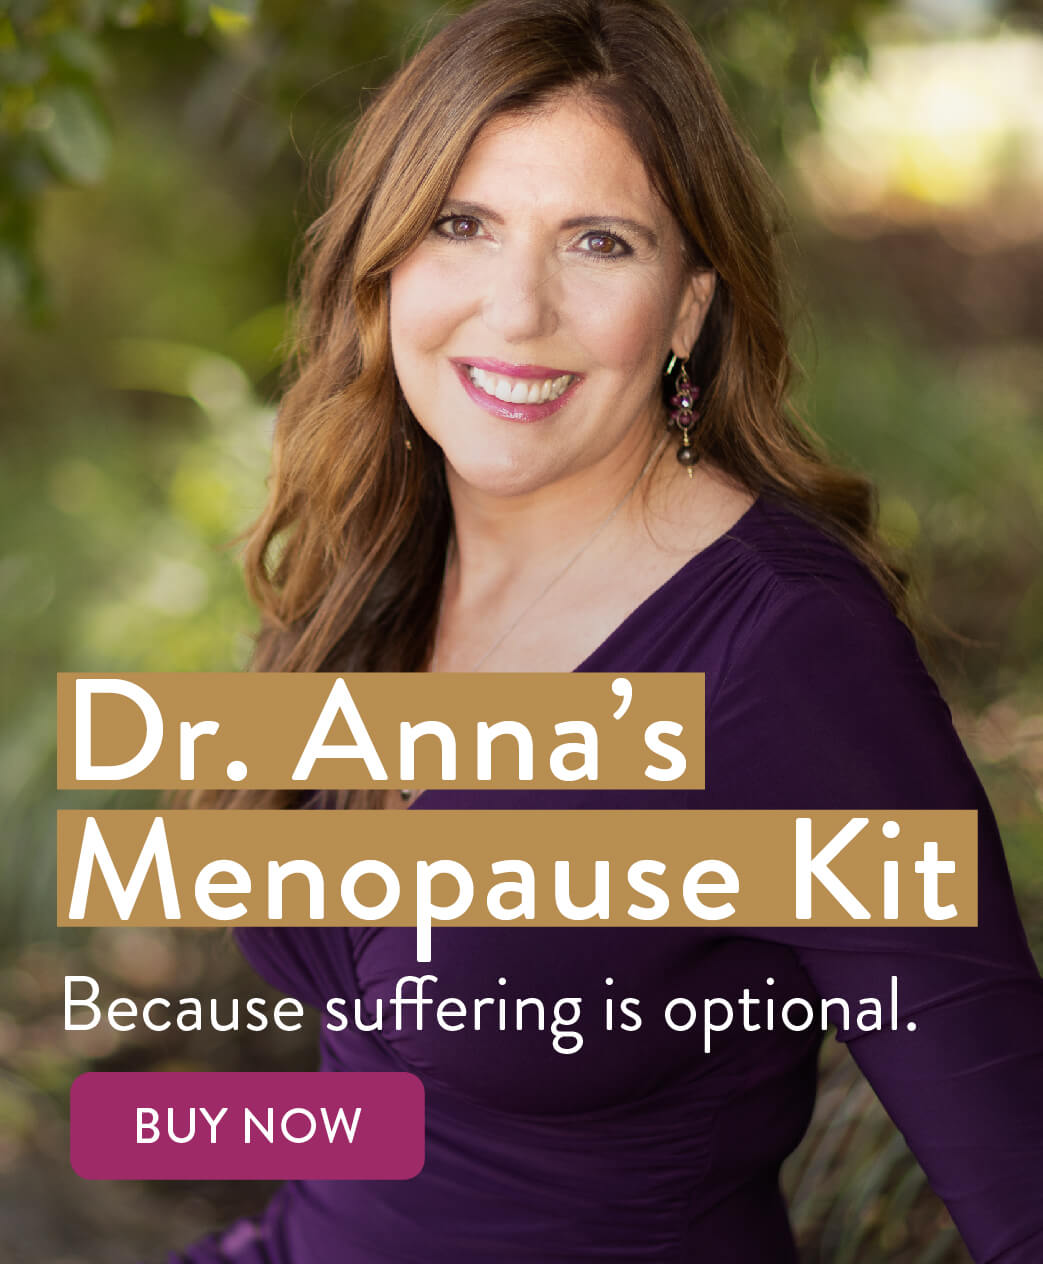 Dr. Anna's Menopause Kit. Because suffering is optional. Buy Now